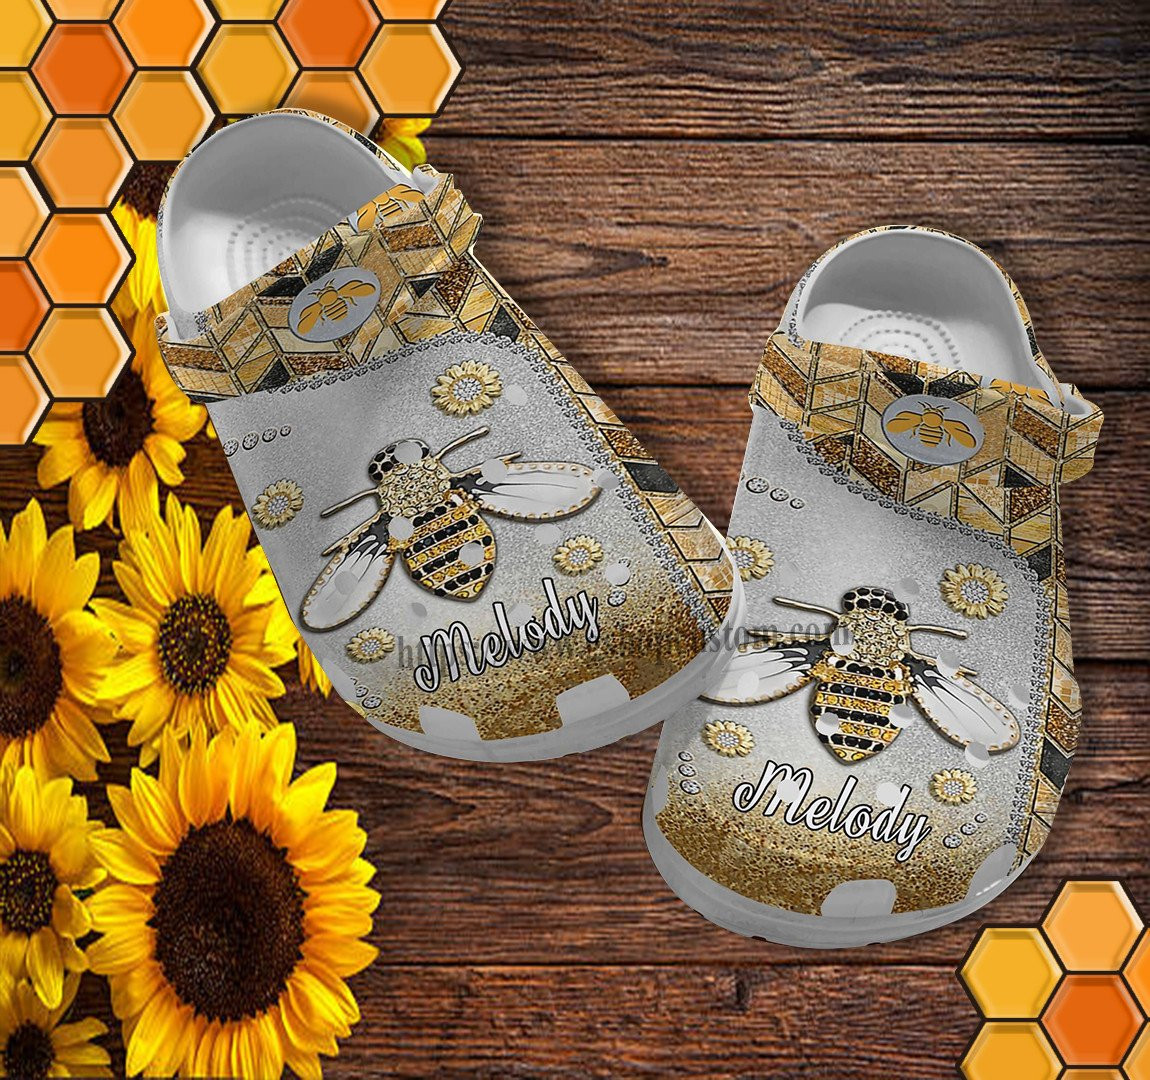 Bee Metal Flower Twinkle Croc Shoes For Women- Bee Kind Hippie Shoes Croc Clogs Birthday Customize